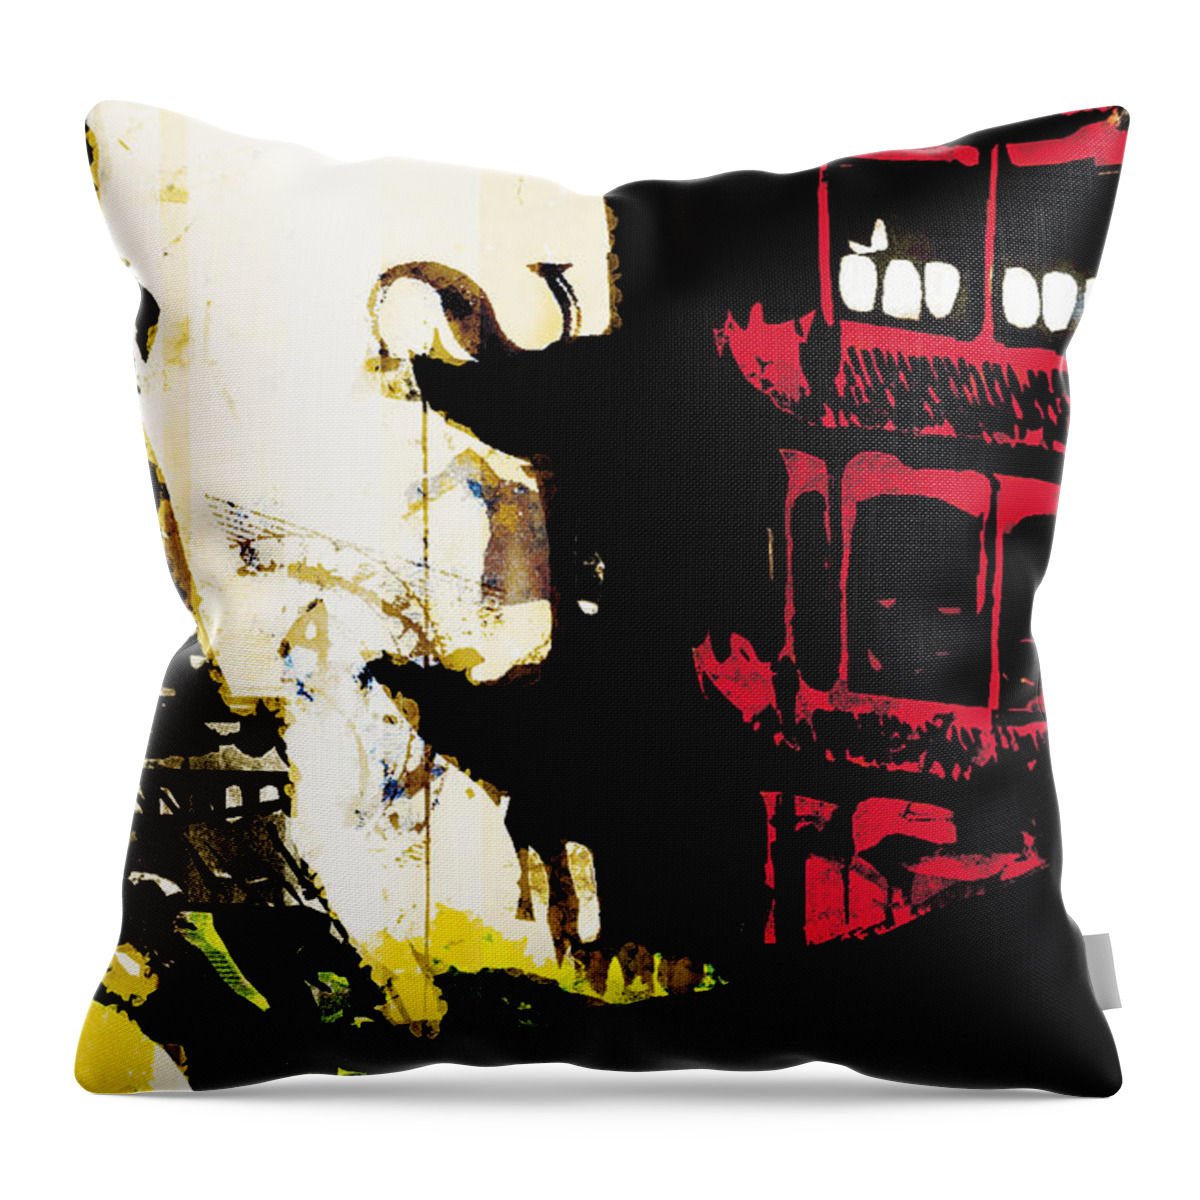 Architecture Throw Pillow featuring the mixed media My Pagoda by Brian Drake - Printscapes